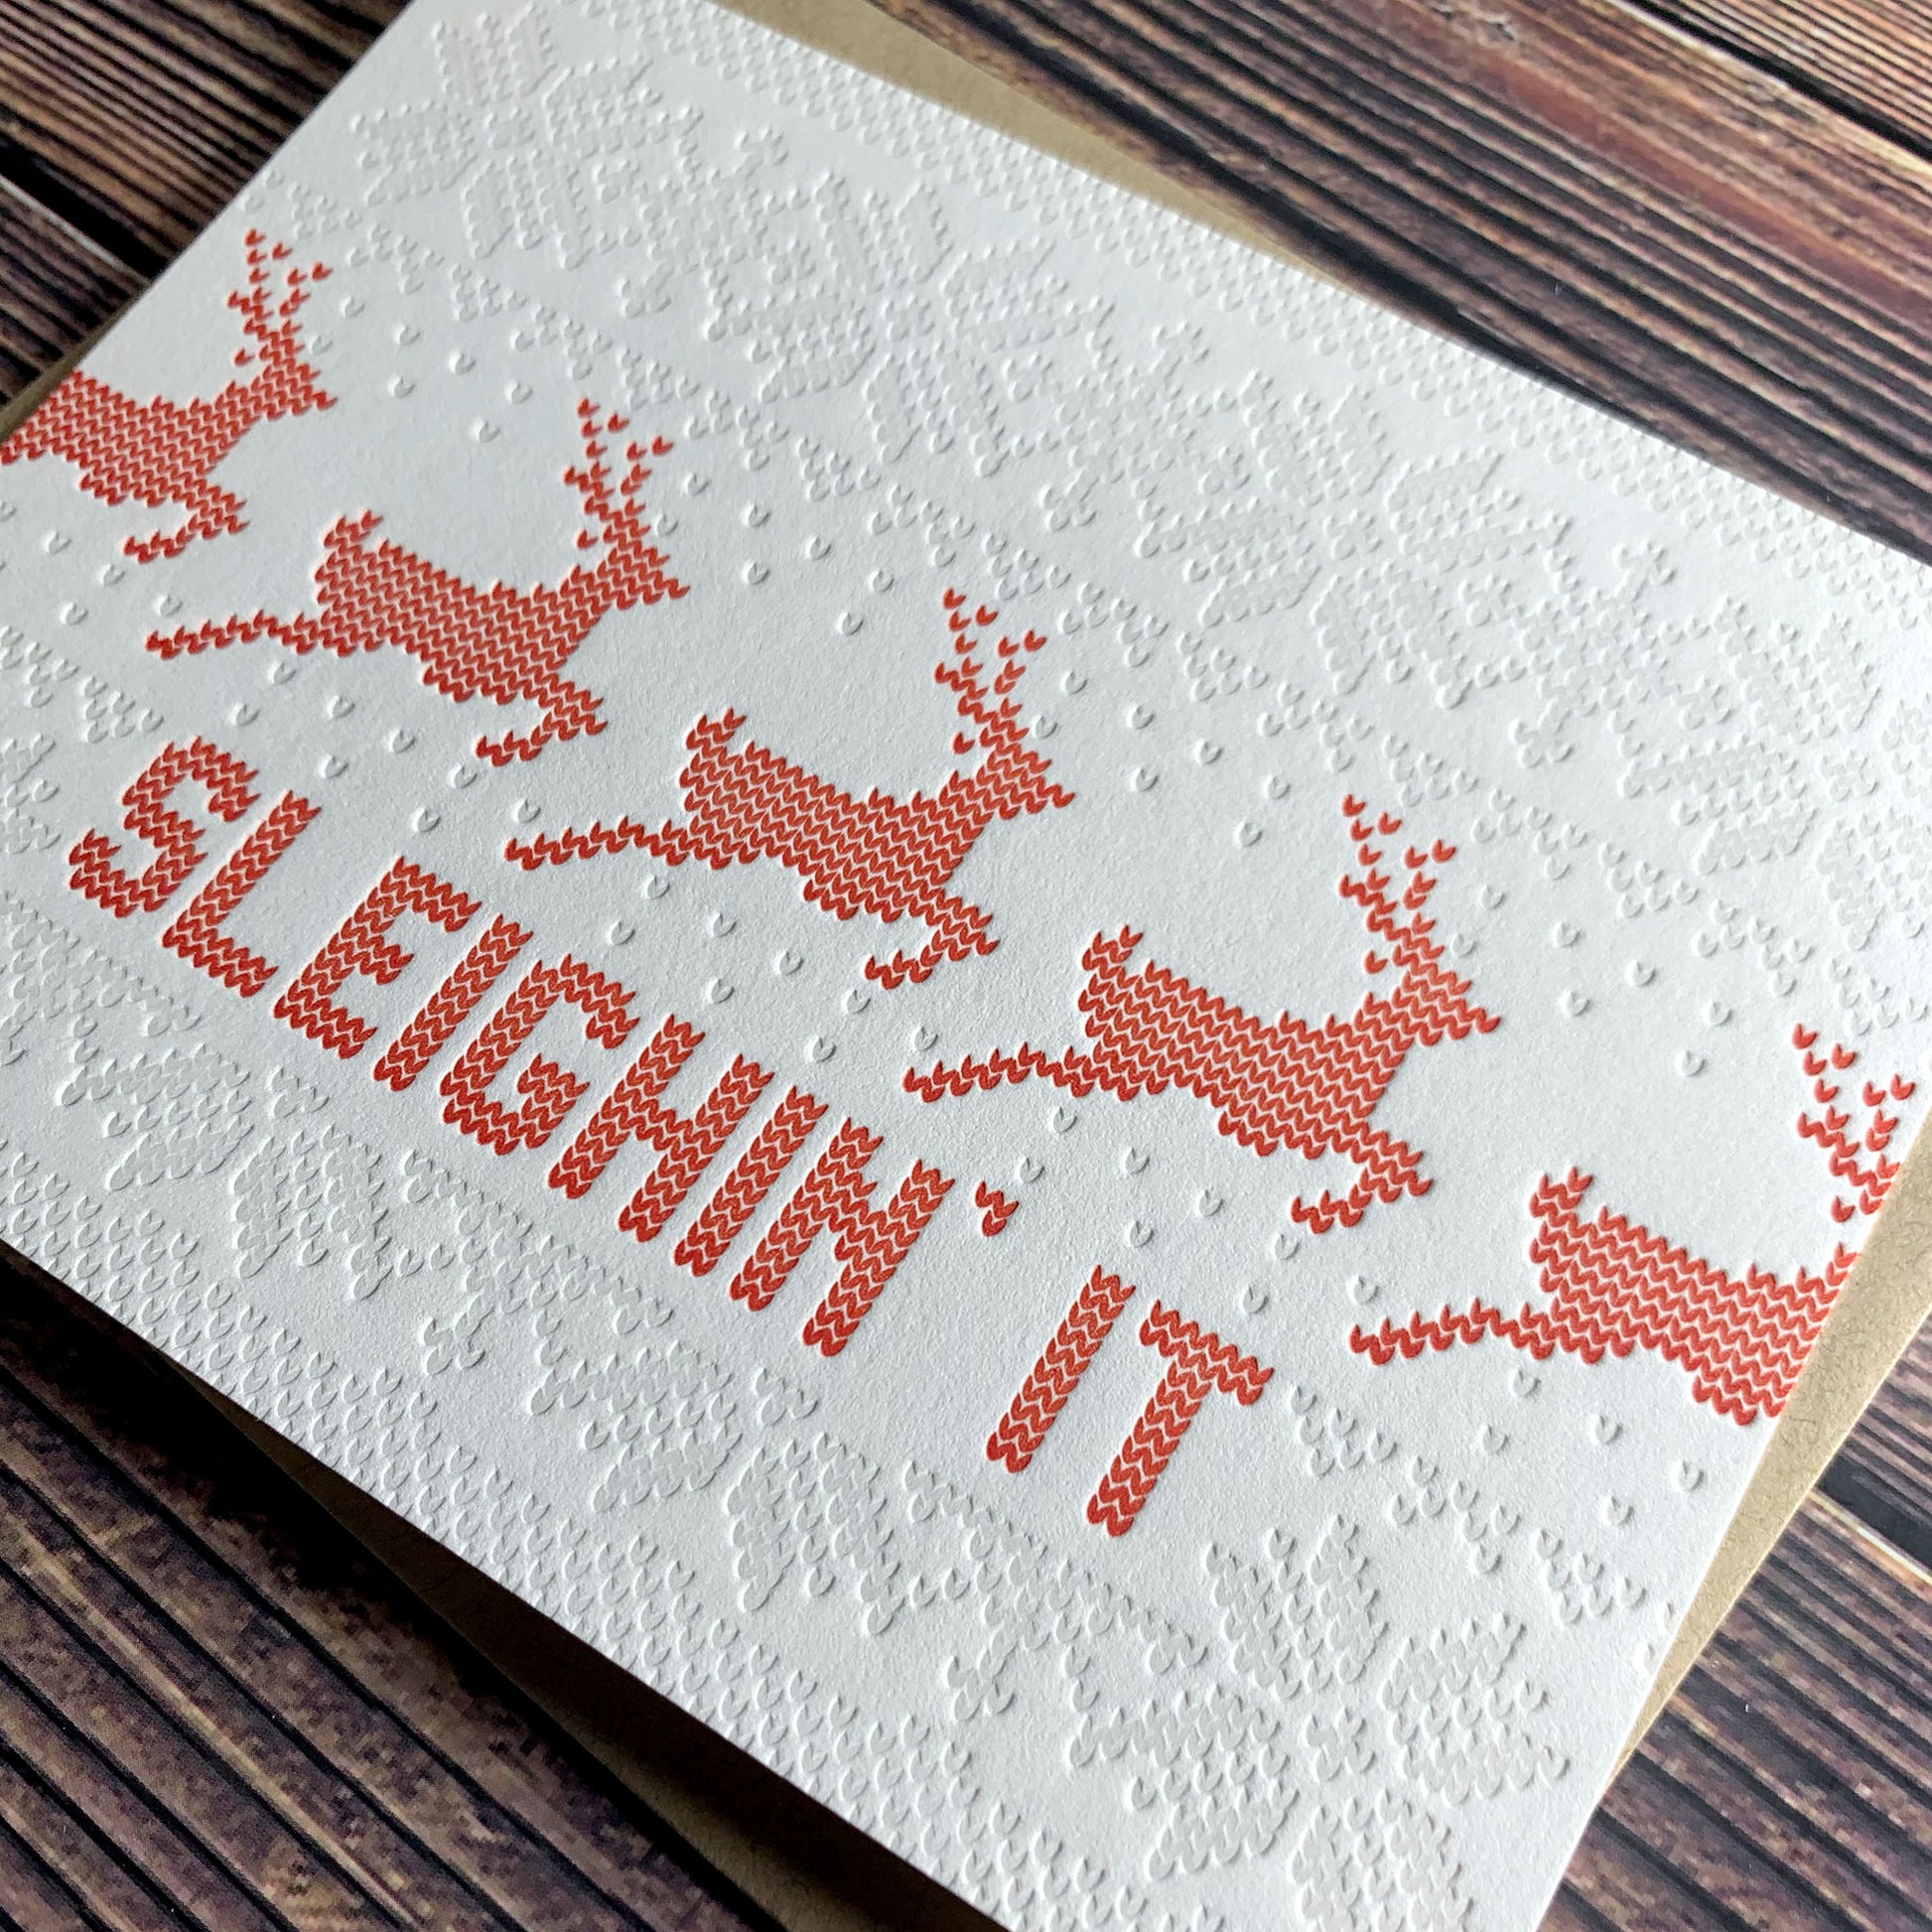 Sleighin' it, Ugly Sweater Christmas Card, Letterpress printed, view shows letterpress impression, includes envelope